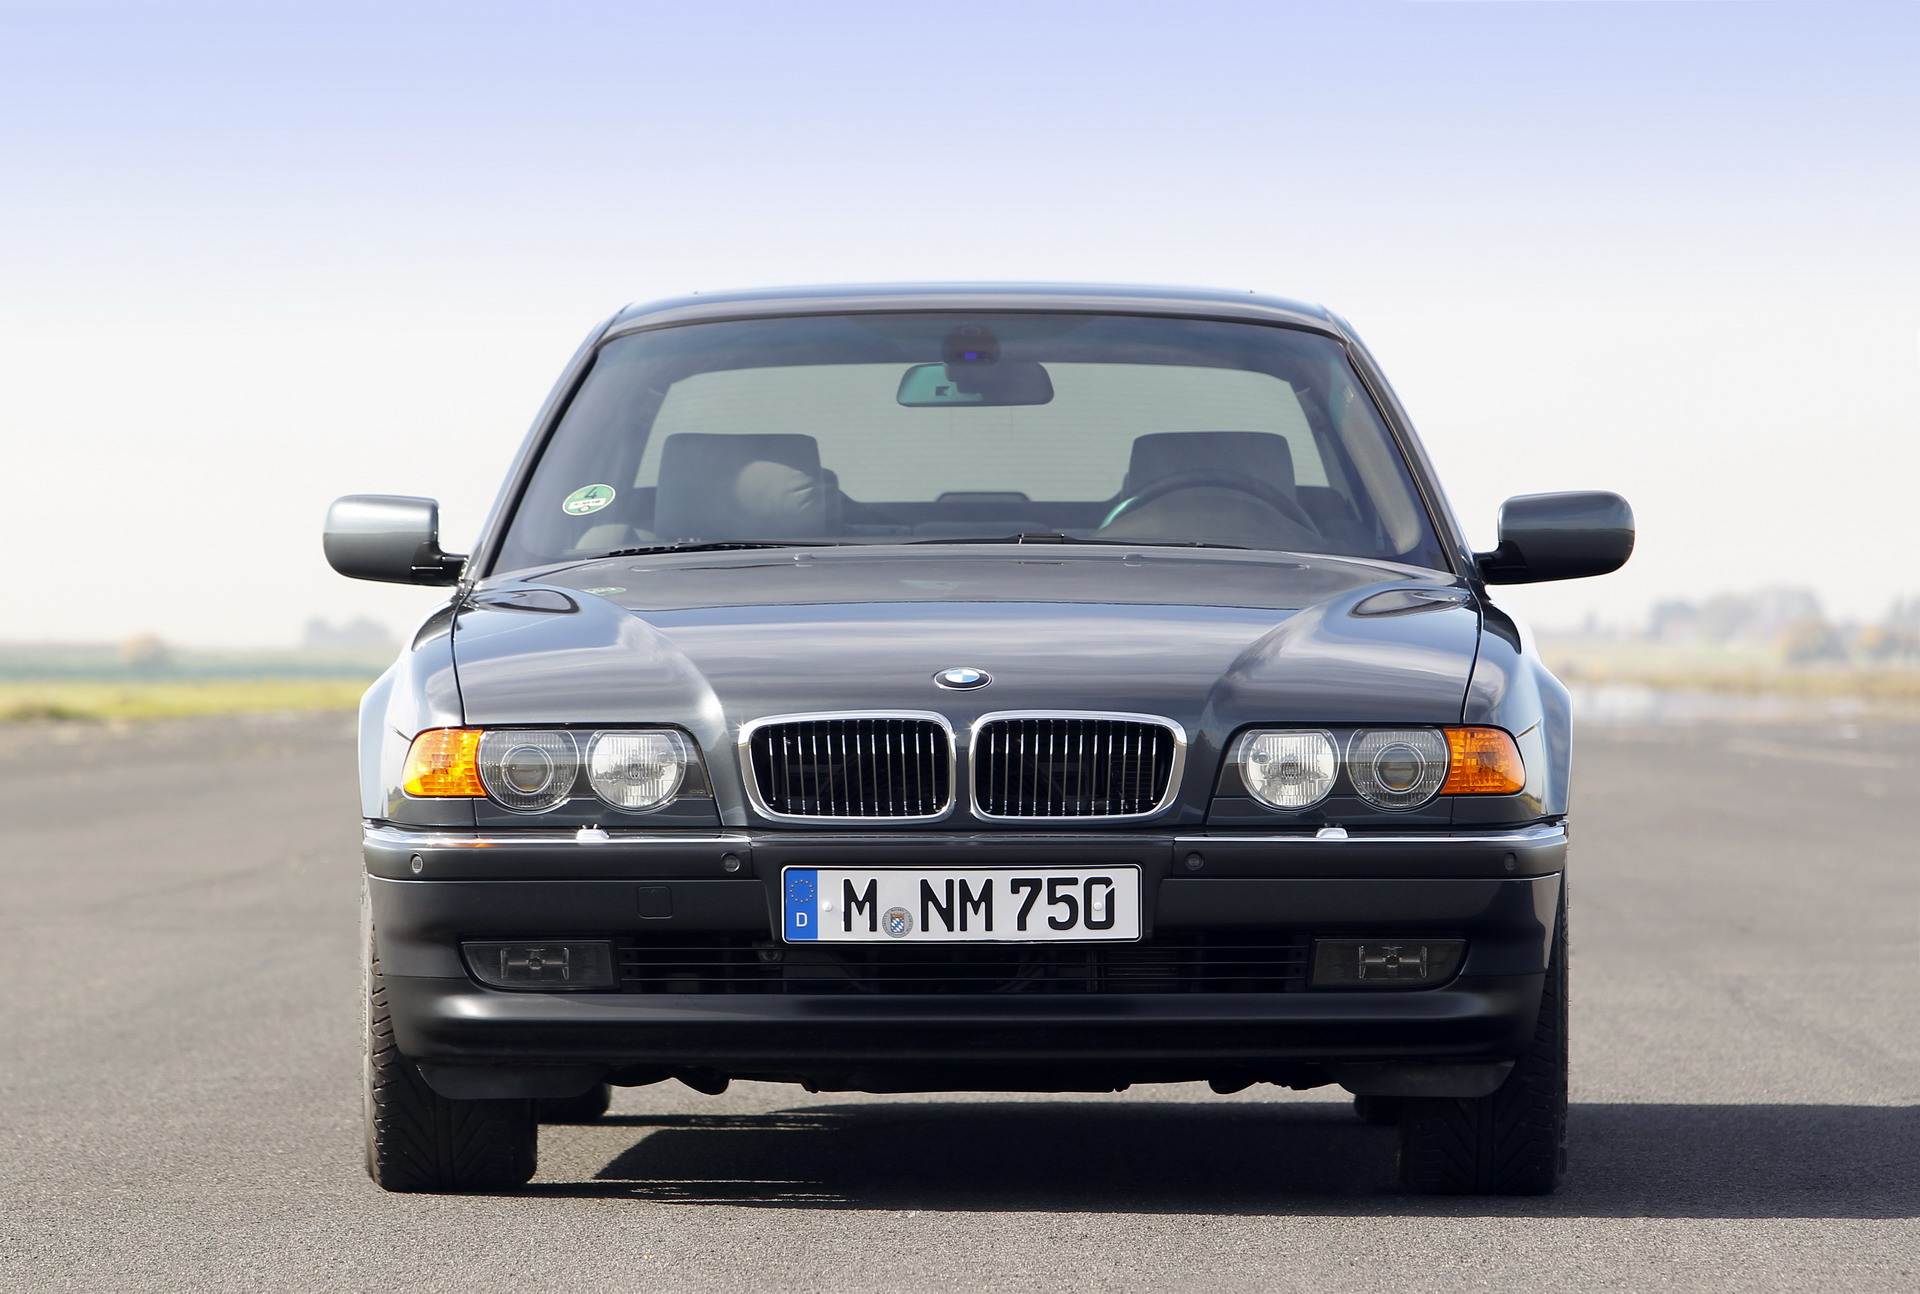 This 155-mile 1997 BMW 740i is proof time traveling is possible